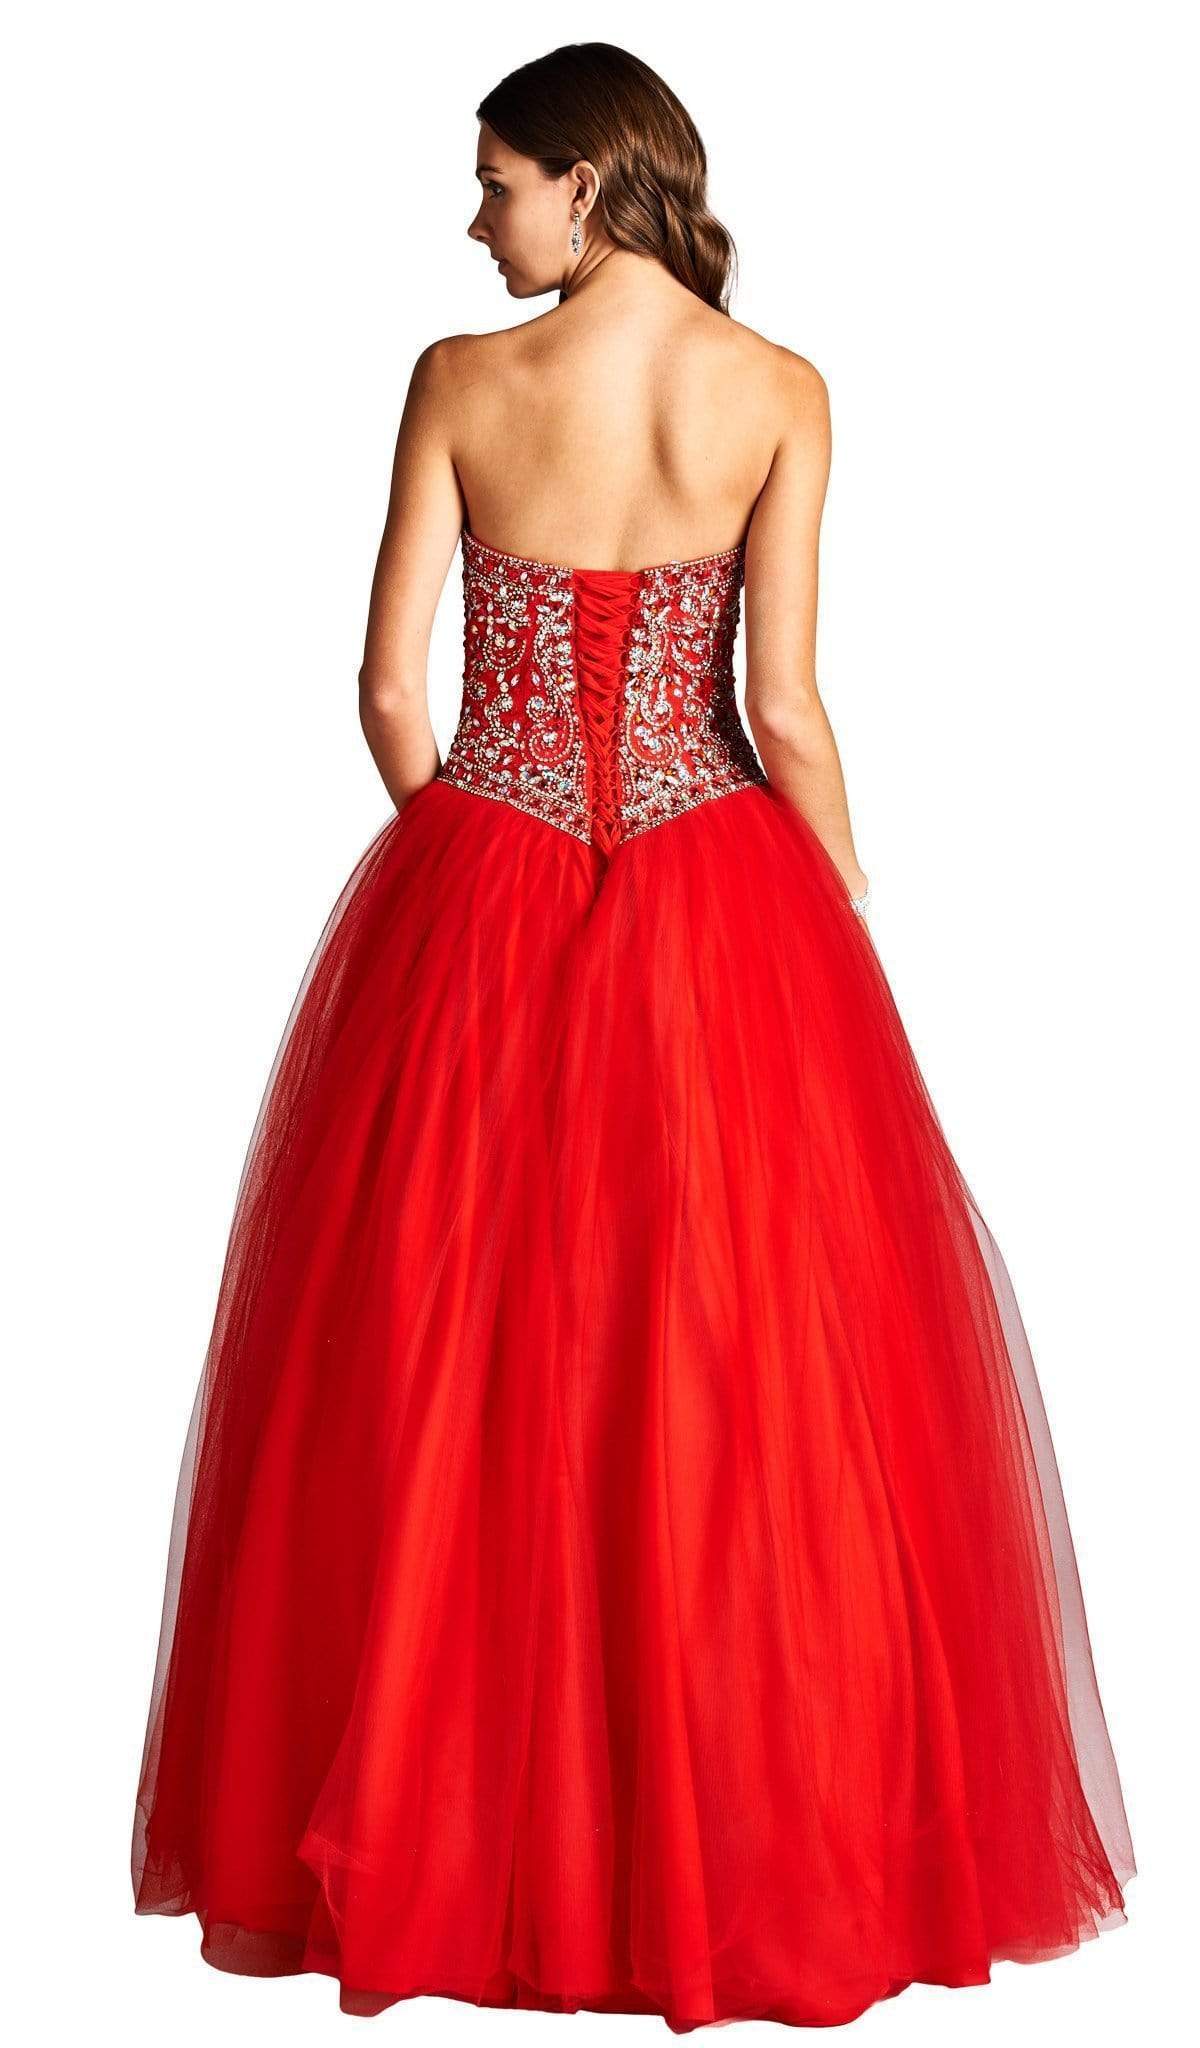 Strapless Bejeweled Sweetheart Evening Ballgown Dress